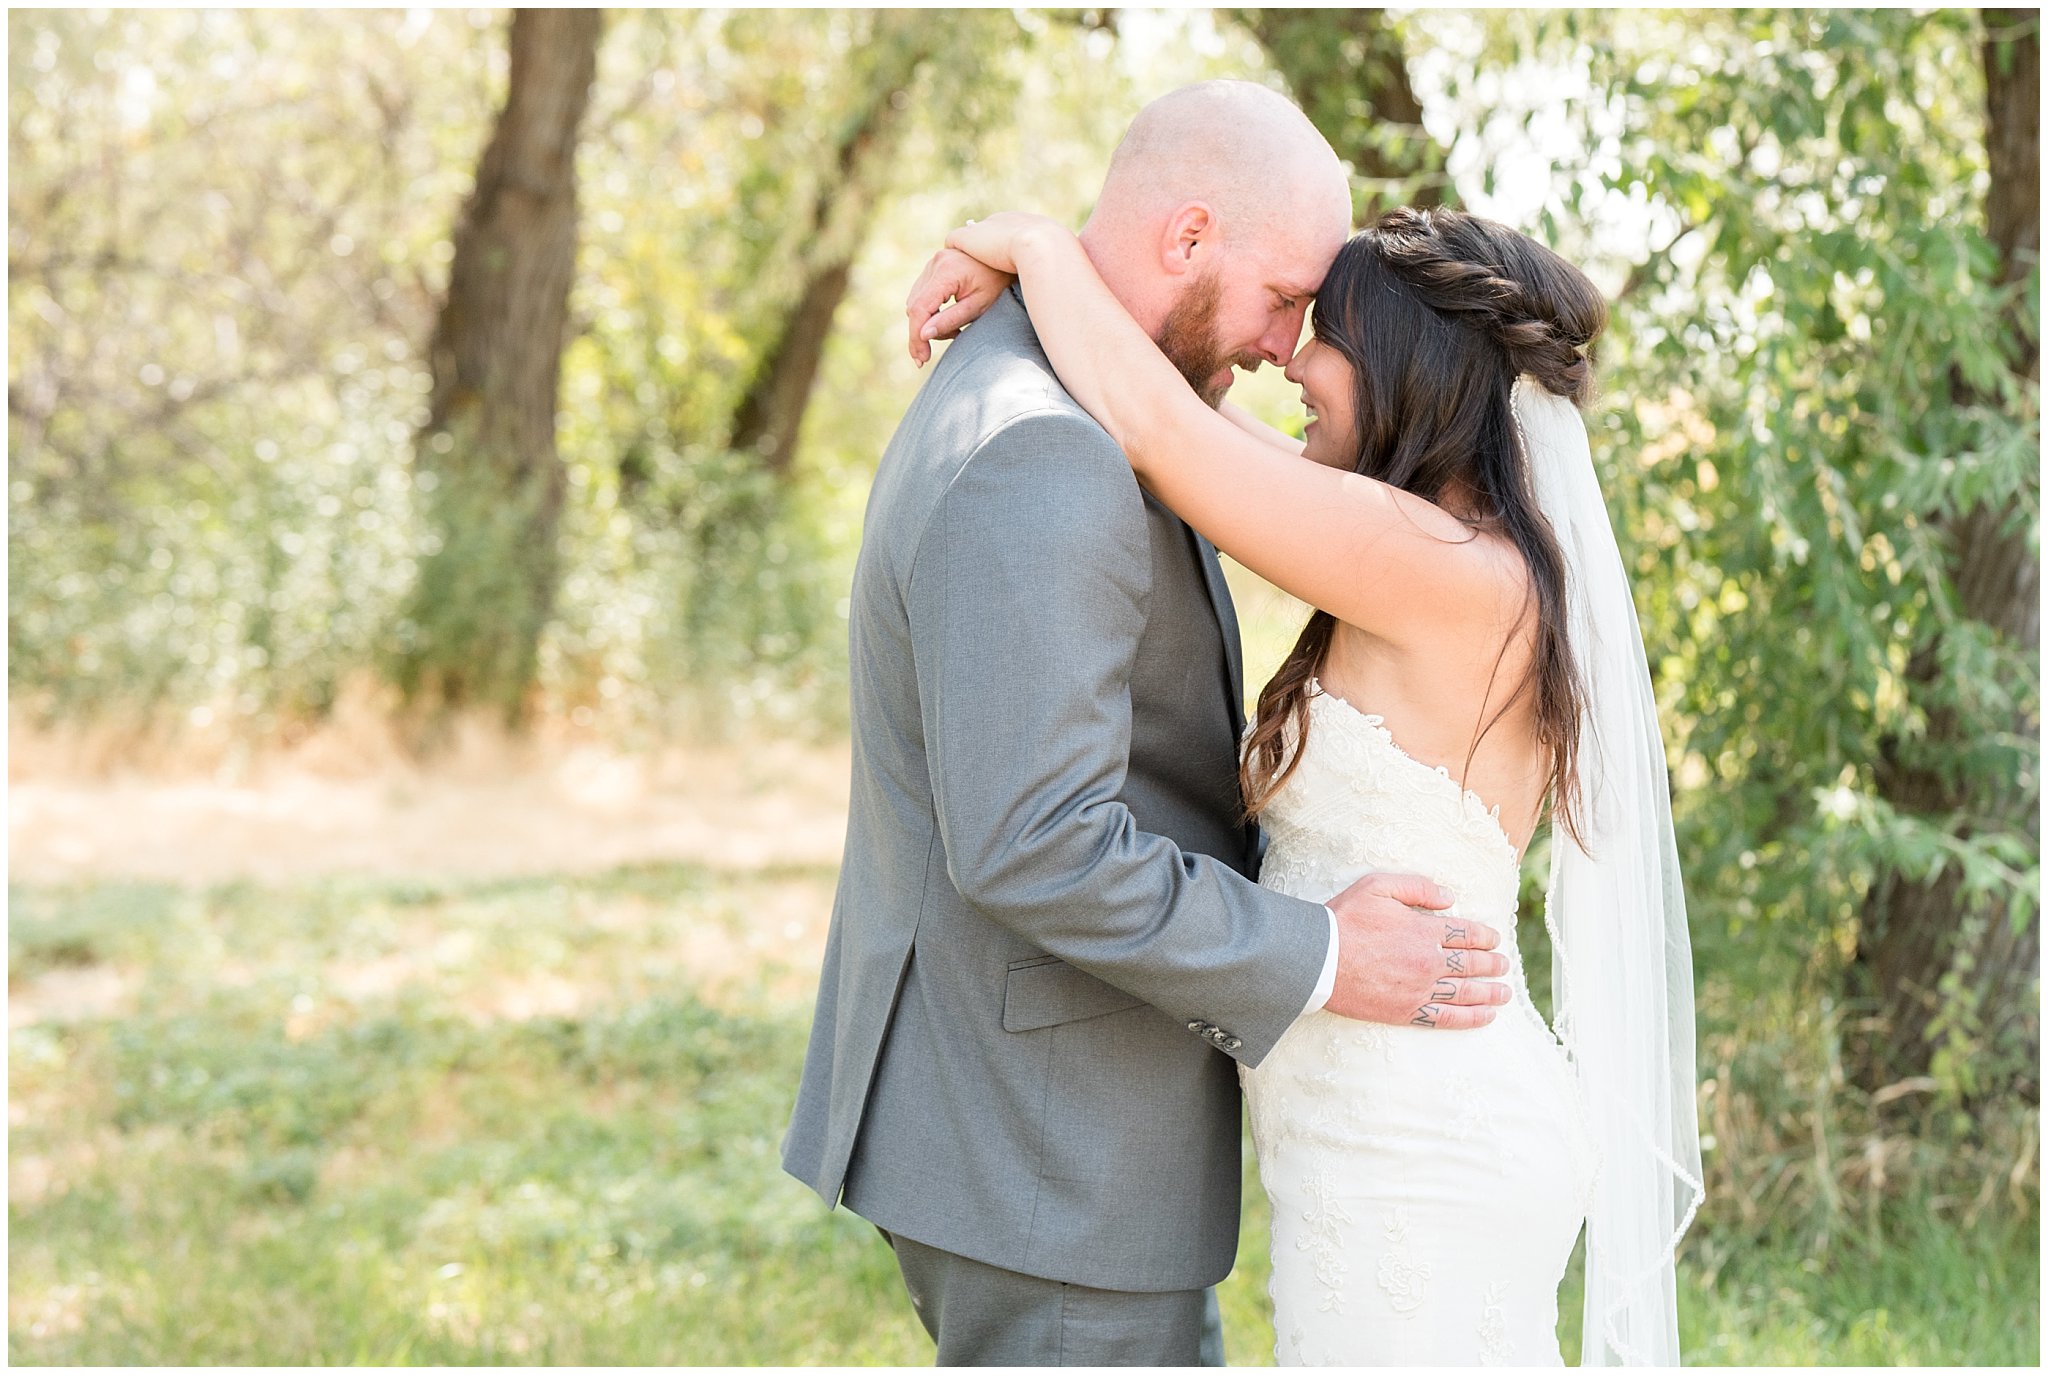 Bride and groom embrace after first look in the trees | Davis County Outdoor Wedding | Jessie and Dallin Photography